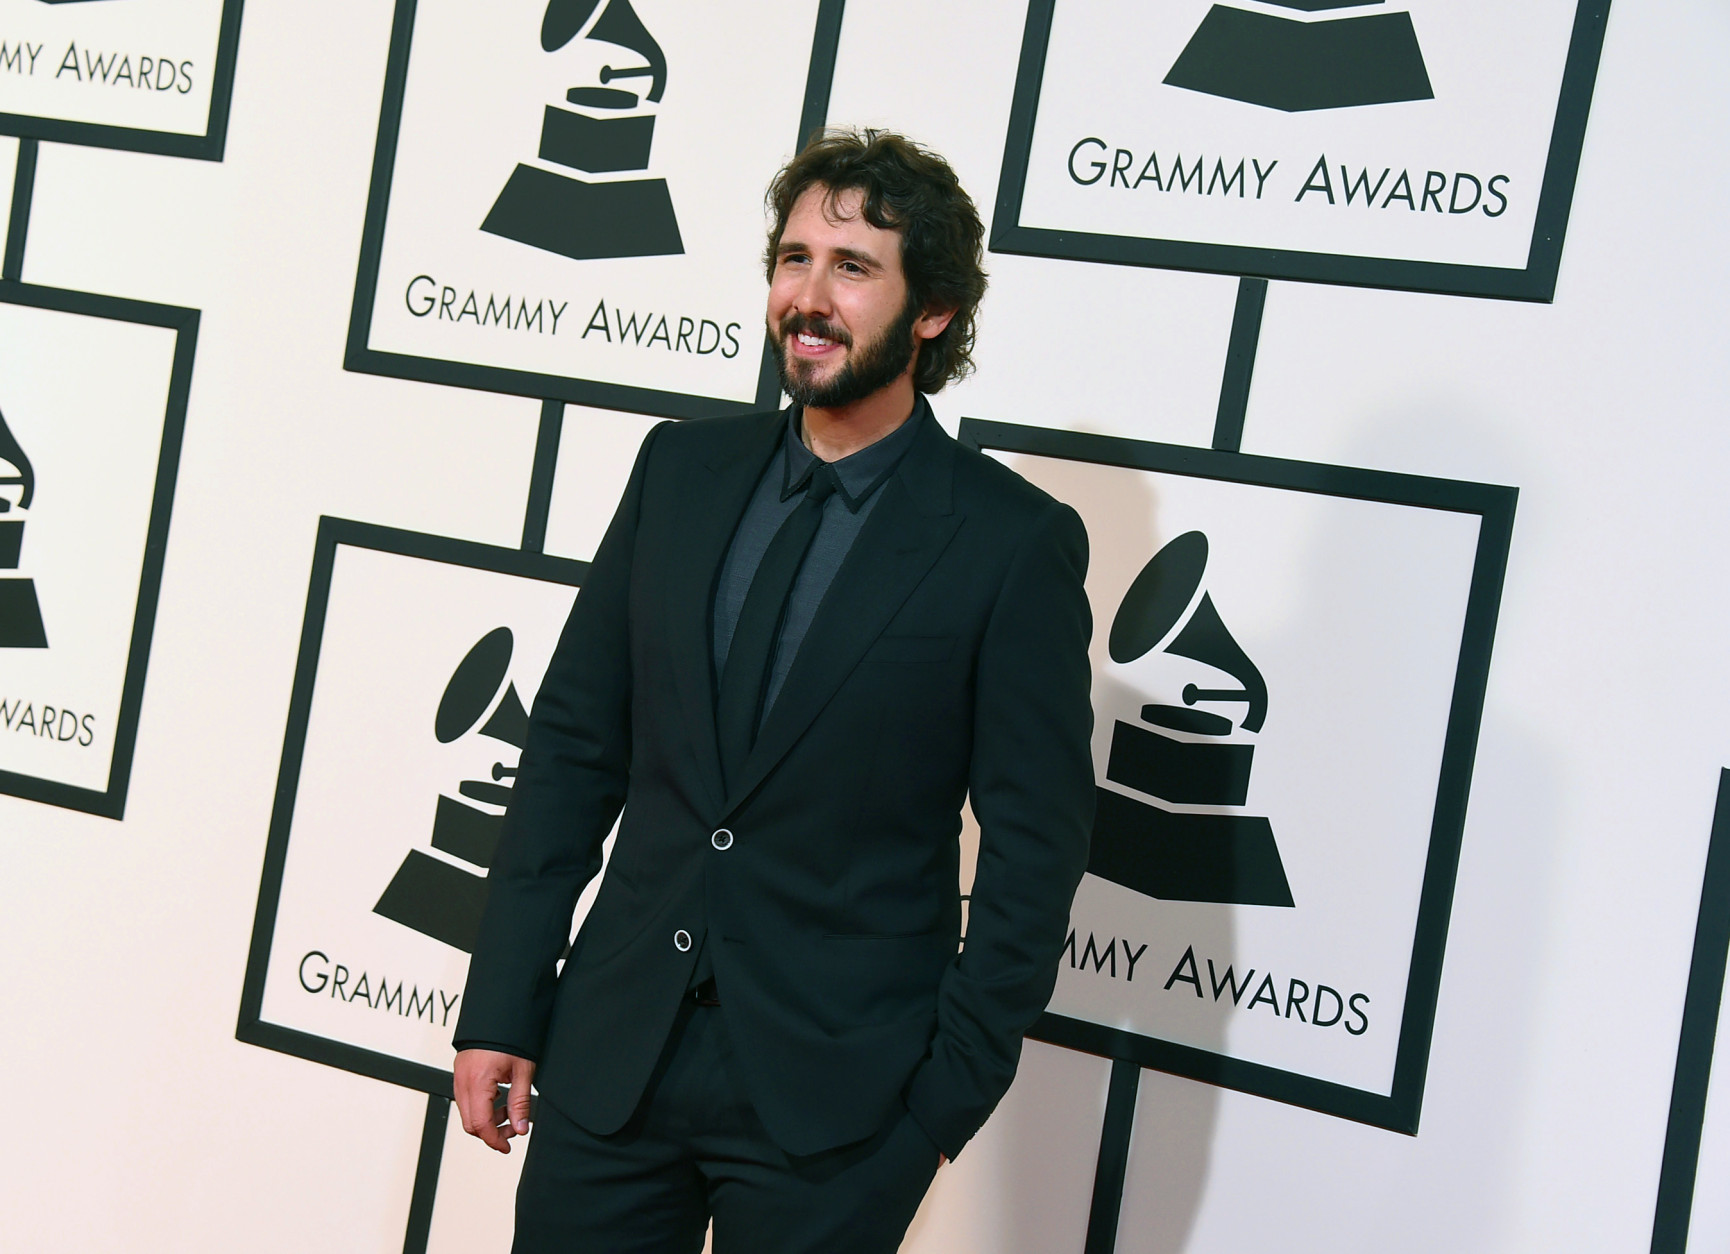 Josh Groban arrives at the 58th annual Grammy Awards at the Staples Center on Monday, Feb. 15, 2016, in Los Angeles. (Photo by Jordan Strauss/Invision/AP)